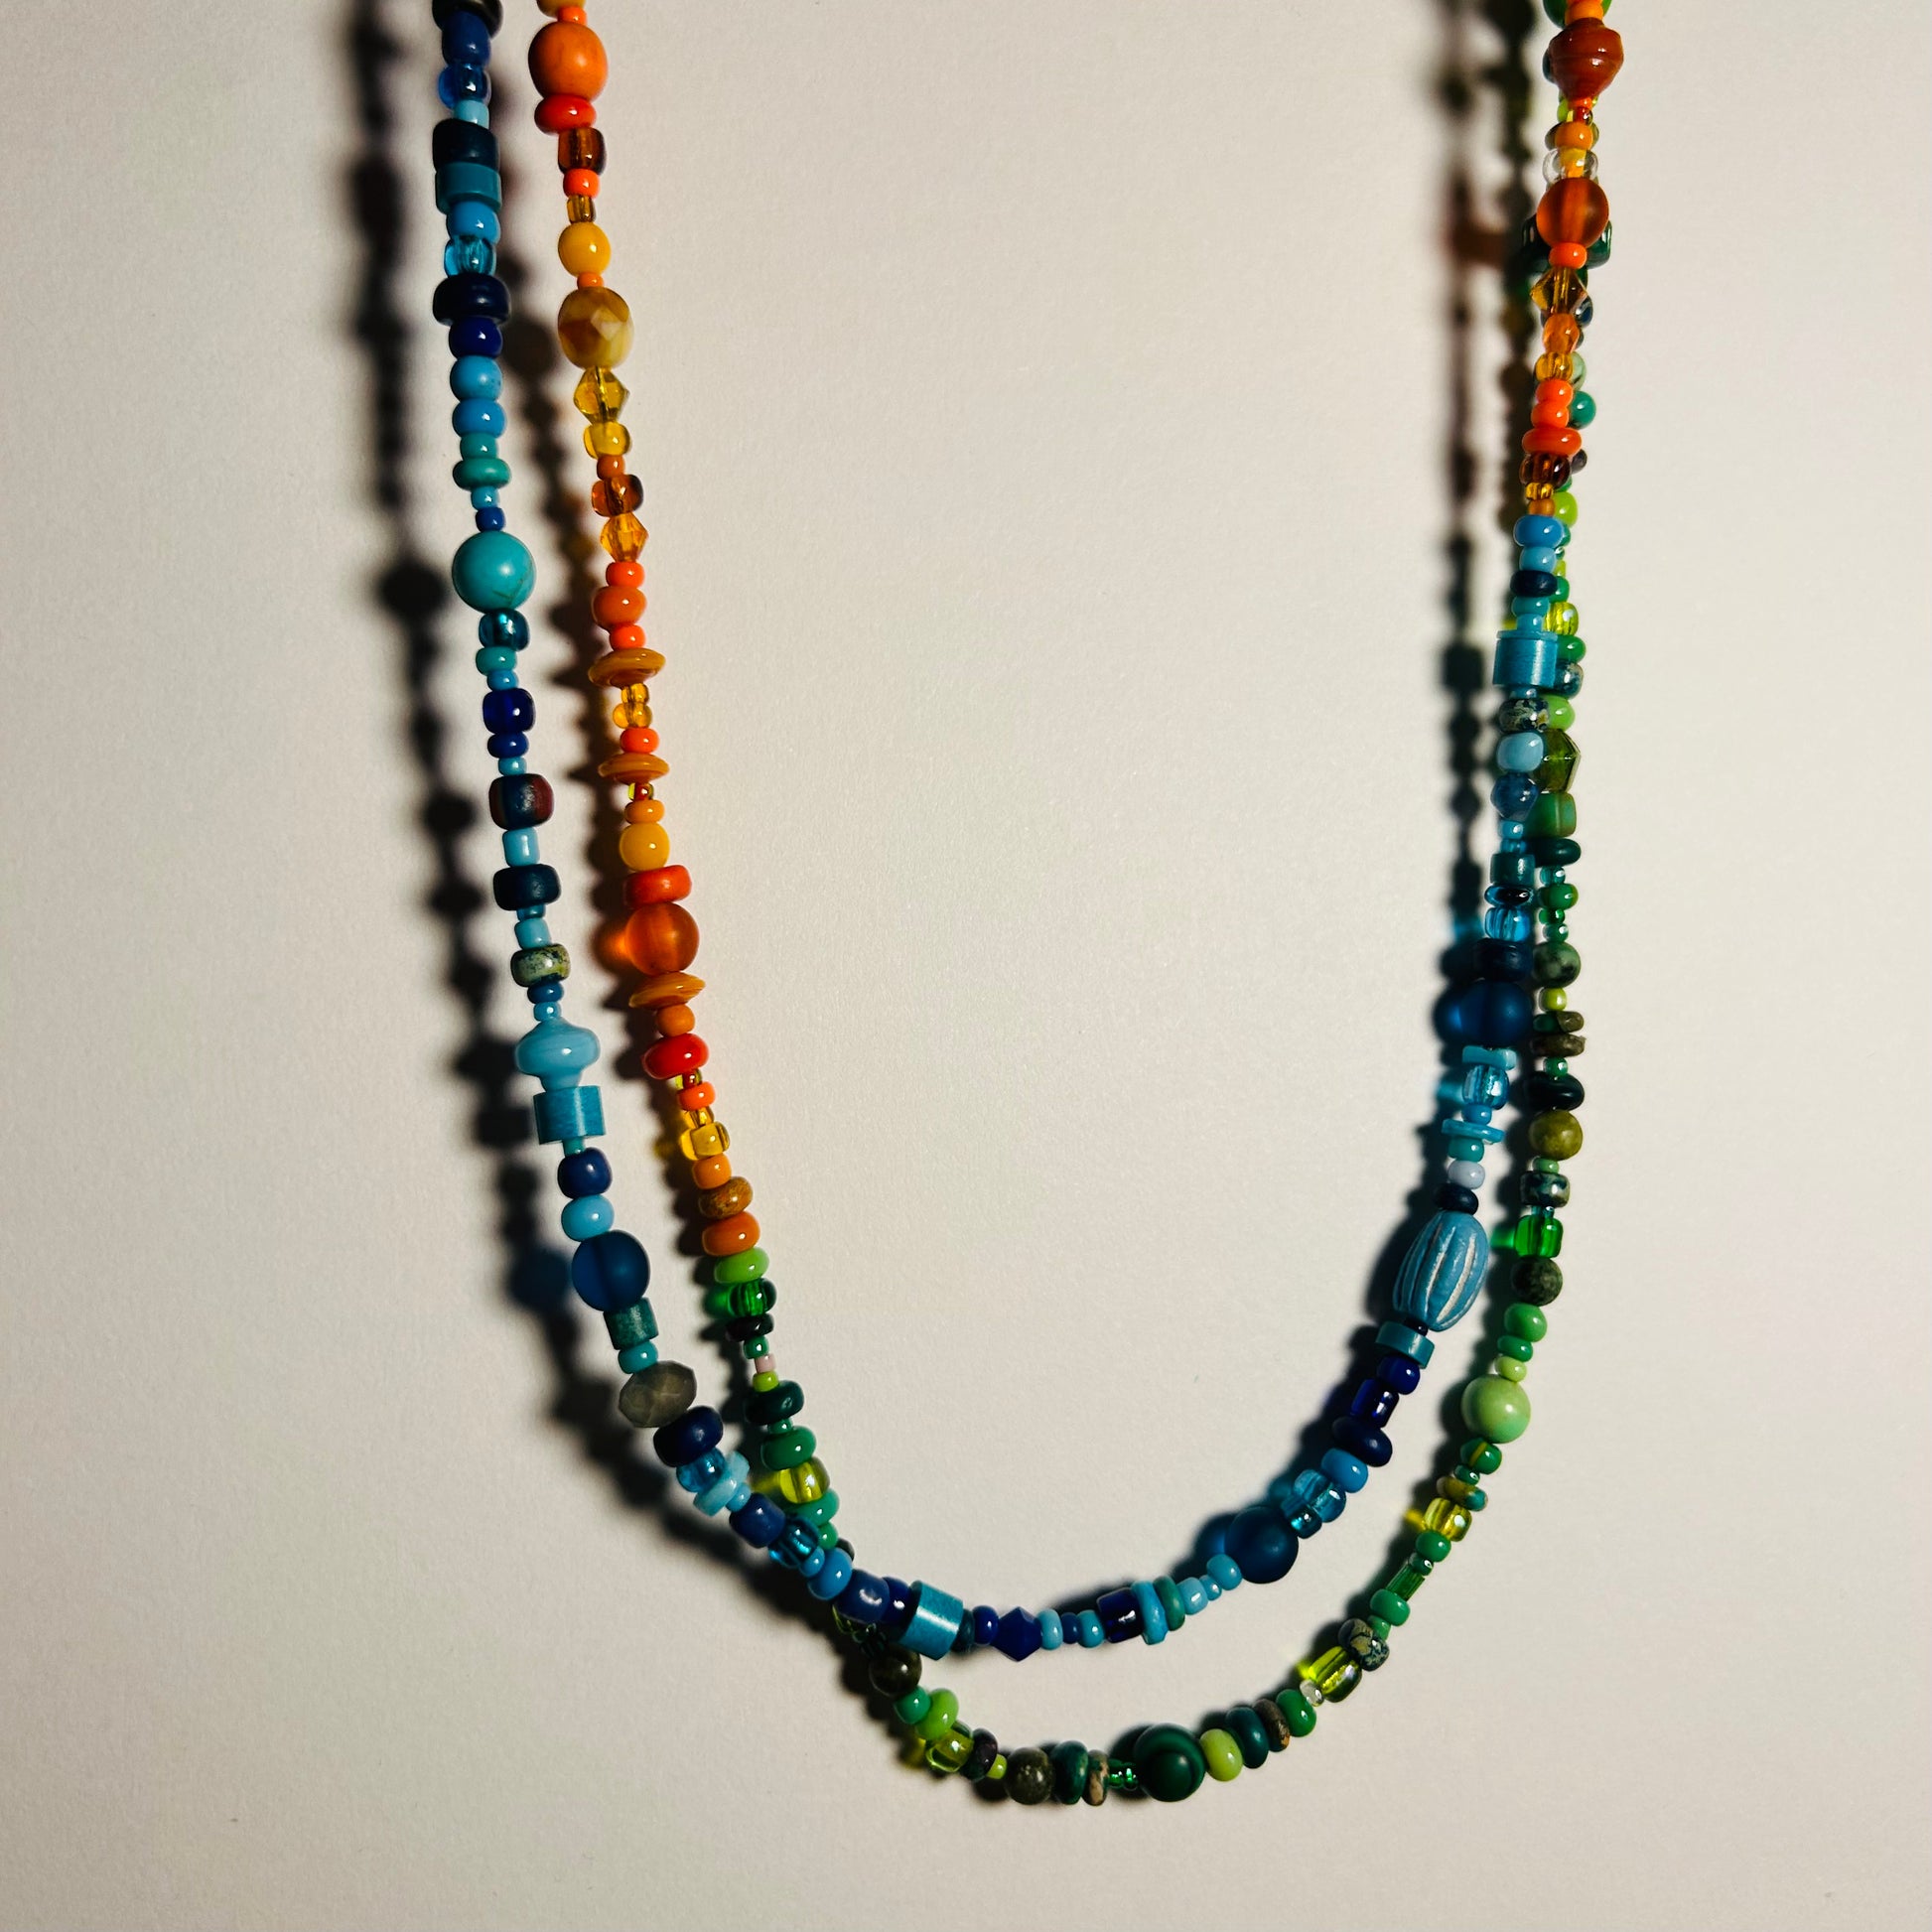 A long beaded necklace displayed hanging, doubled. The necklace has 3 sections of various beads- orange, blue, & green. Handmade beaded necklace, 37.5 inches in length with hook clasp. Made with a marvelous assortment of vintage & new beads from across the globe. Can be worn as a necklace, wrap choker, wrap bracelet, body chain, decorative belt.

